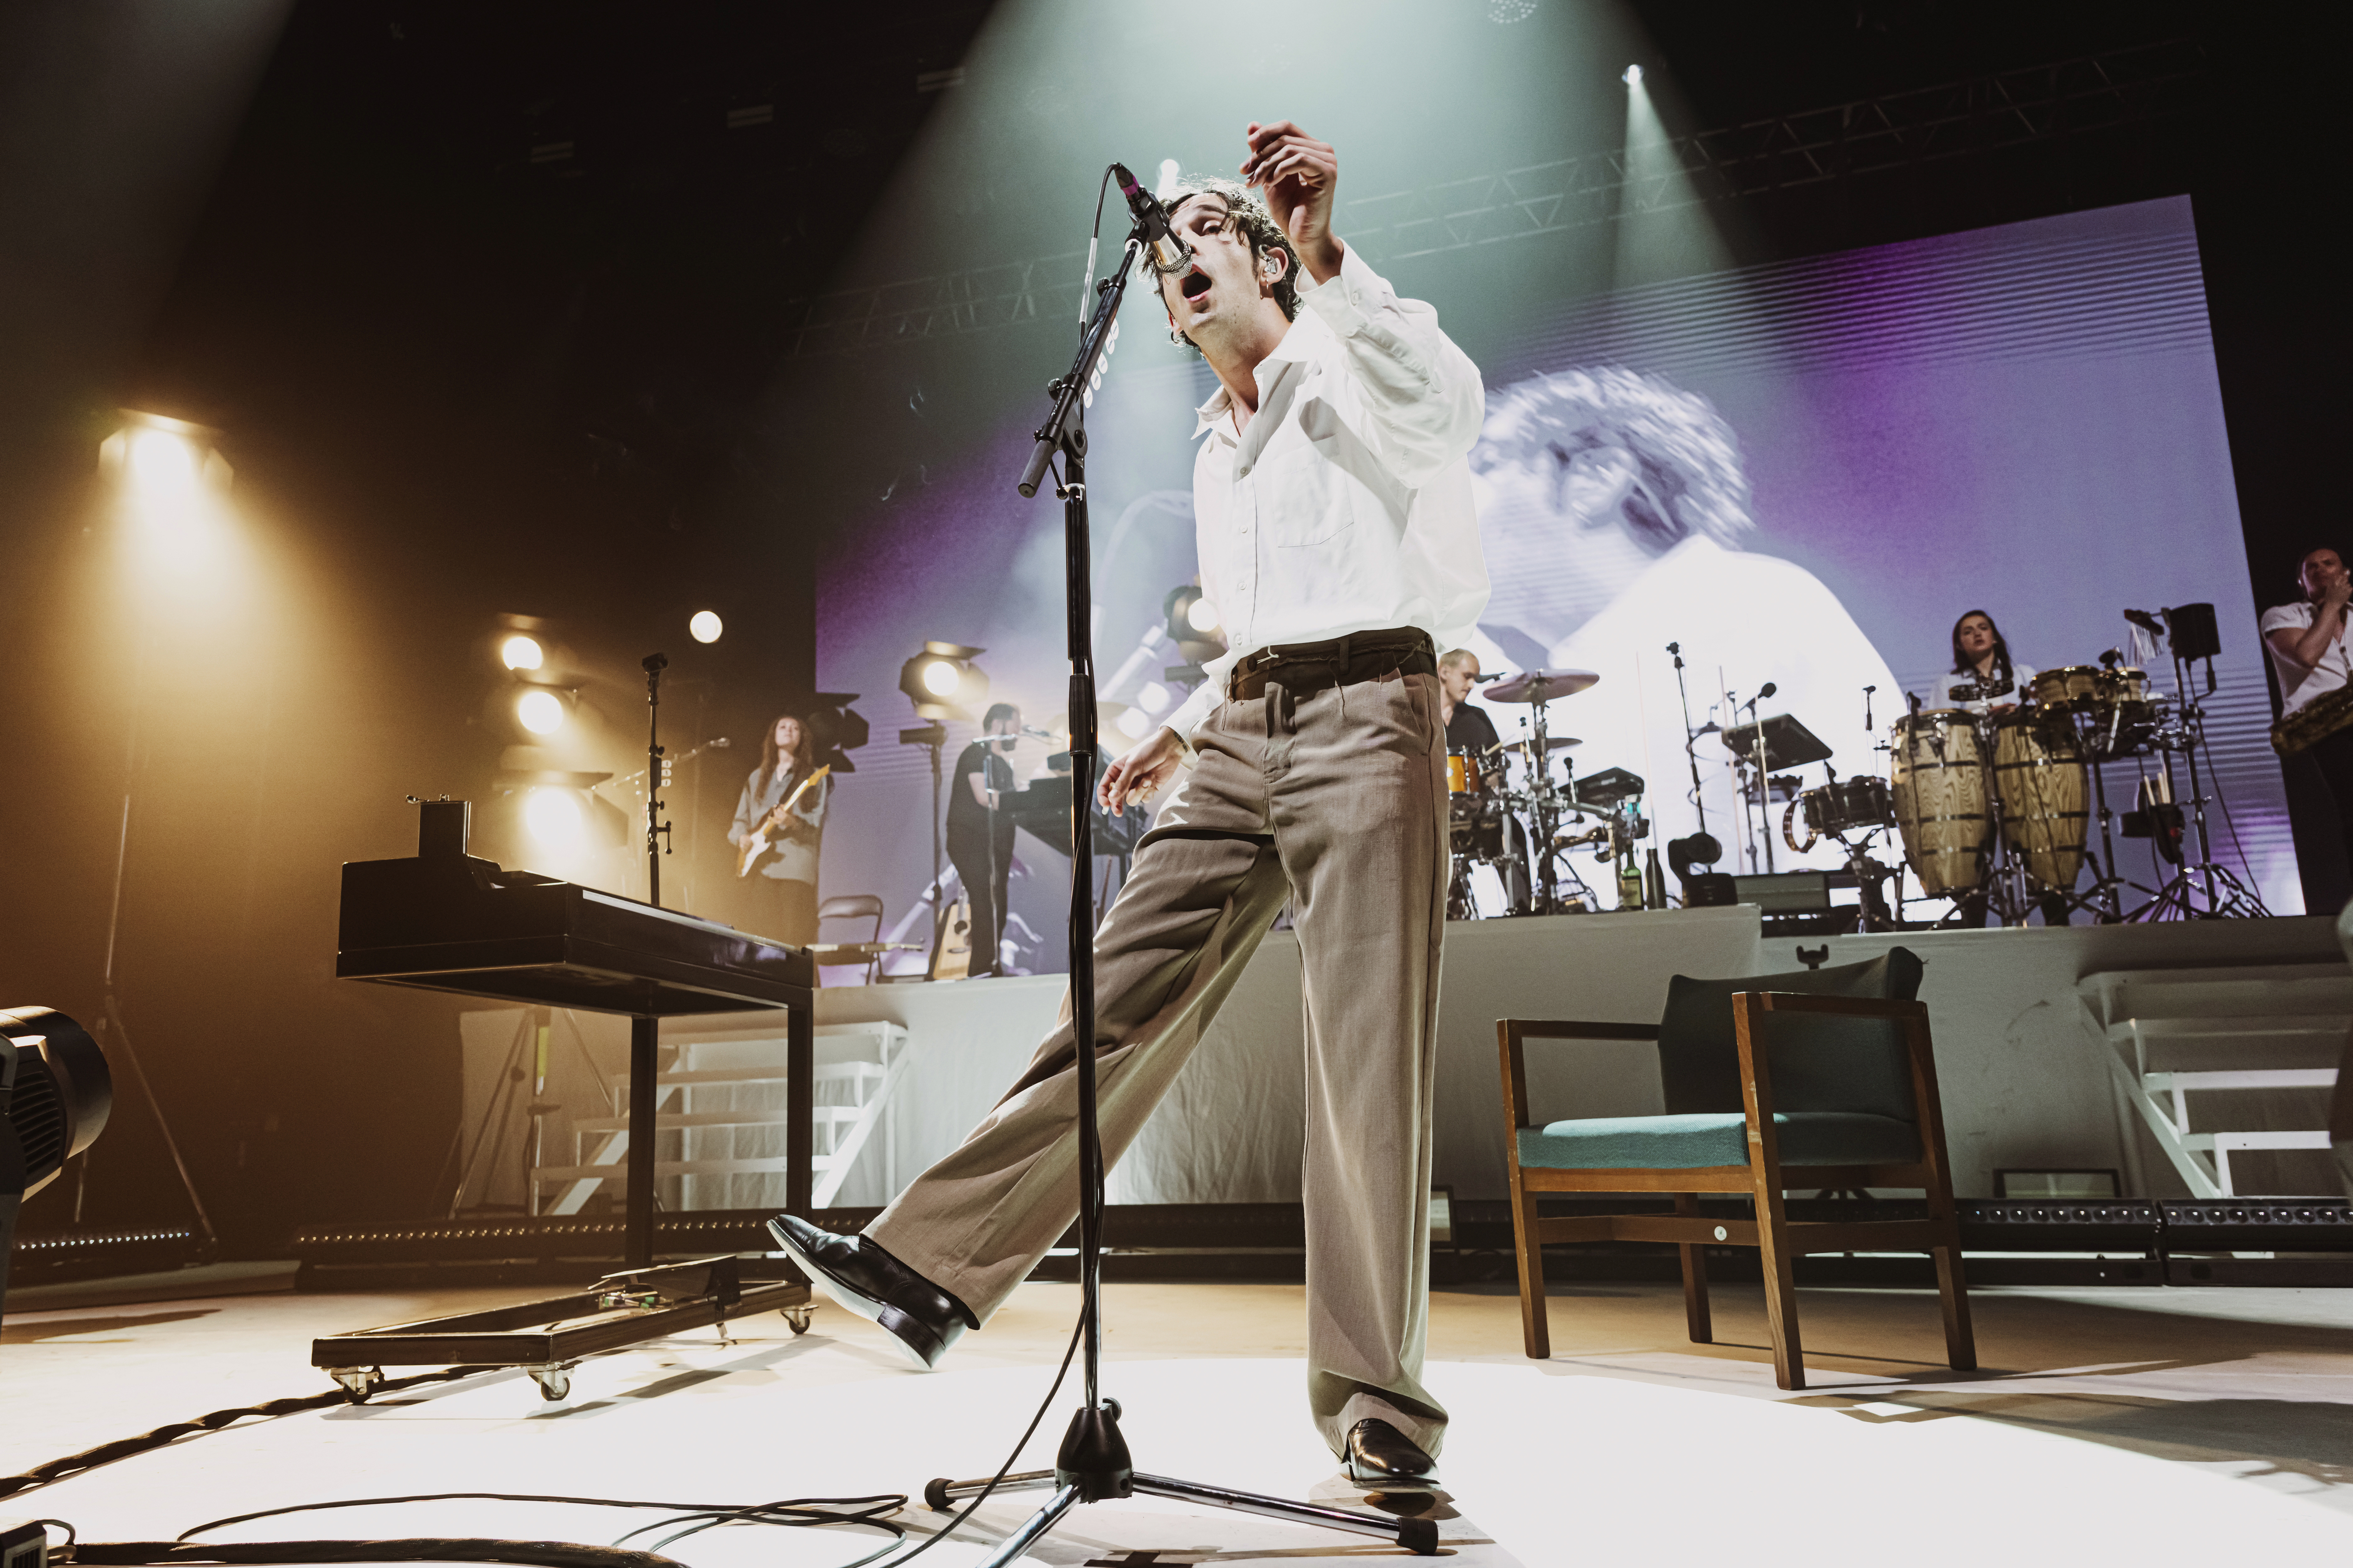 Matty Healy performs energetically on stage, wearing a dress shirt and slacks, with a band and musical instruments in the background